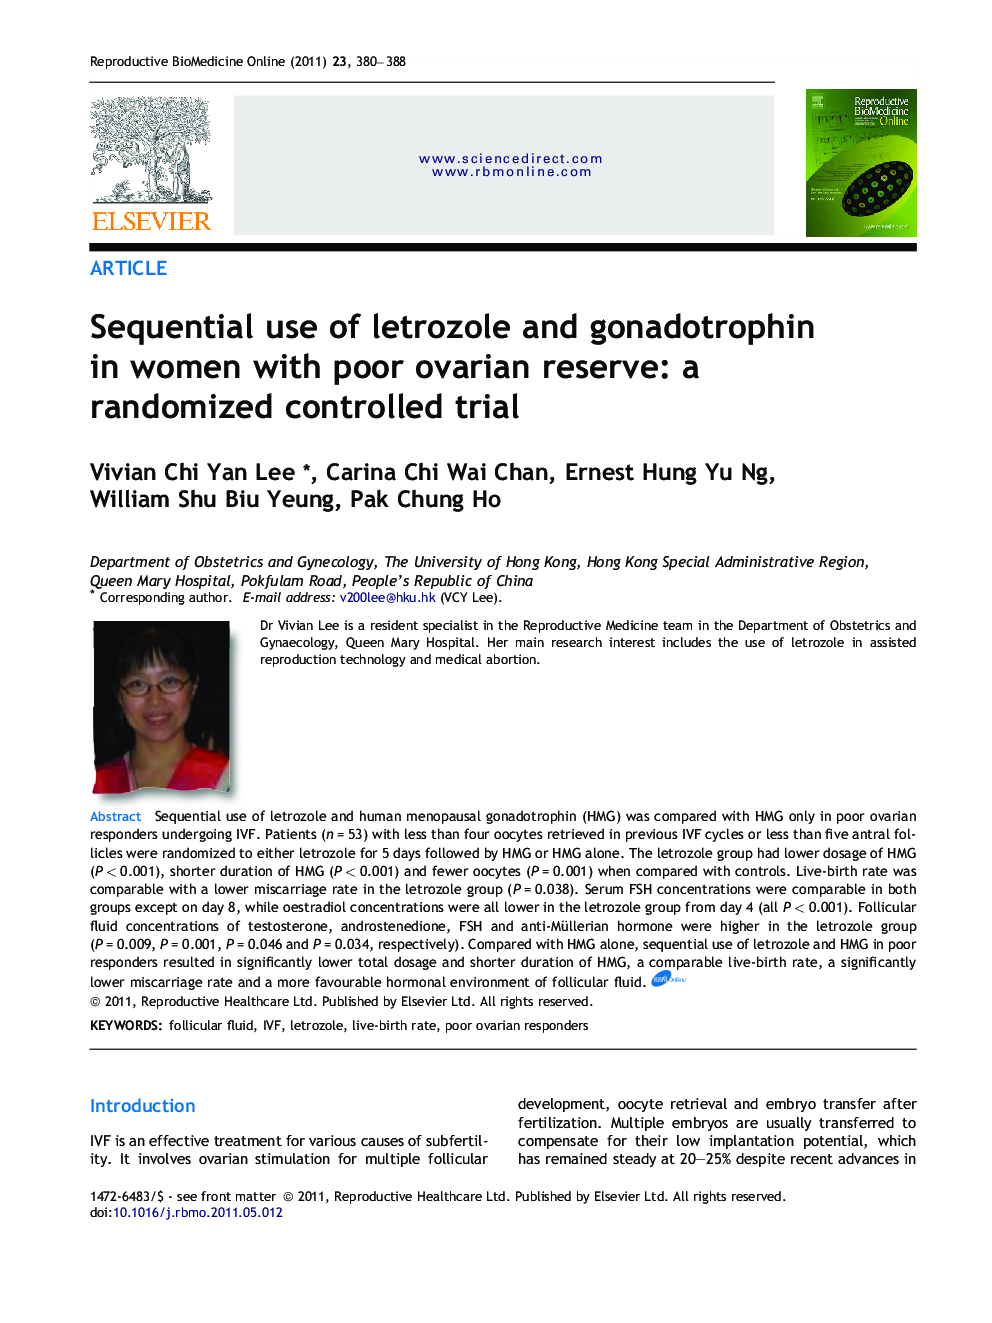 Sequential use of letrozole and gonadotrophin in women with poor ovarian reserve: a randomized controlled trial 